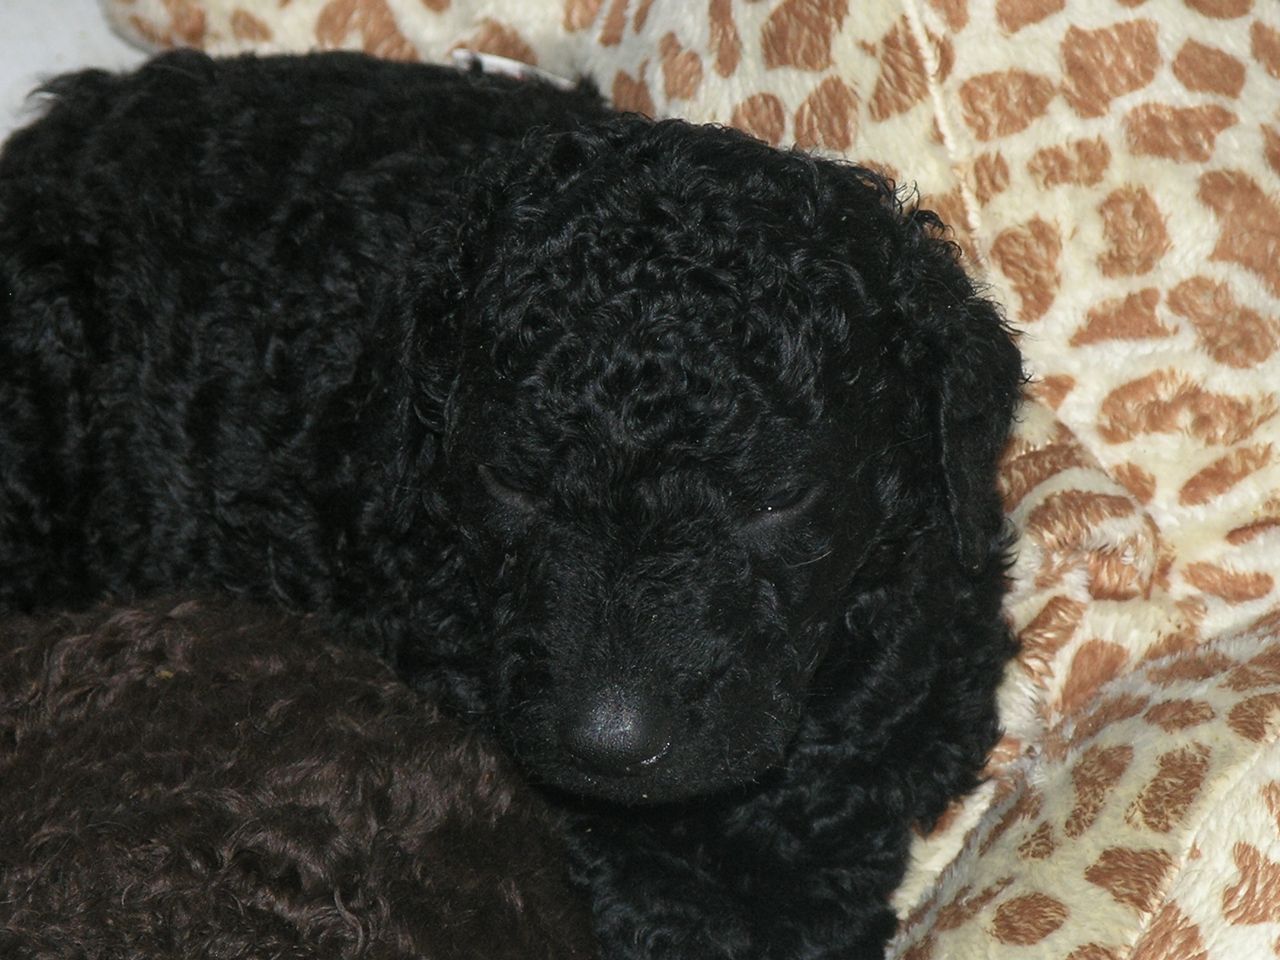 Curly Coated Retriever Puppies: Curly Curly Coated Retriever Puppies For Sale Derby Breed